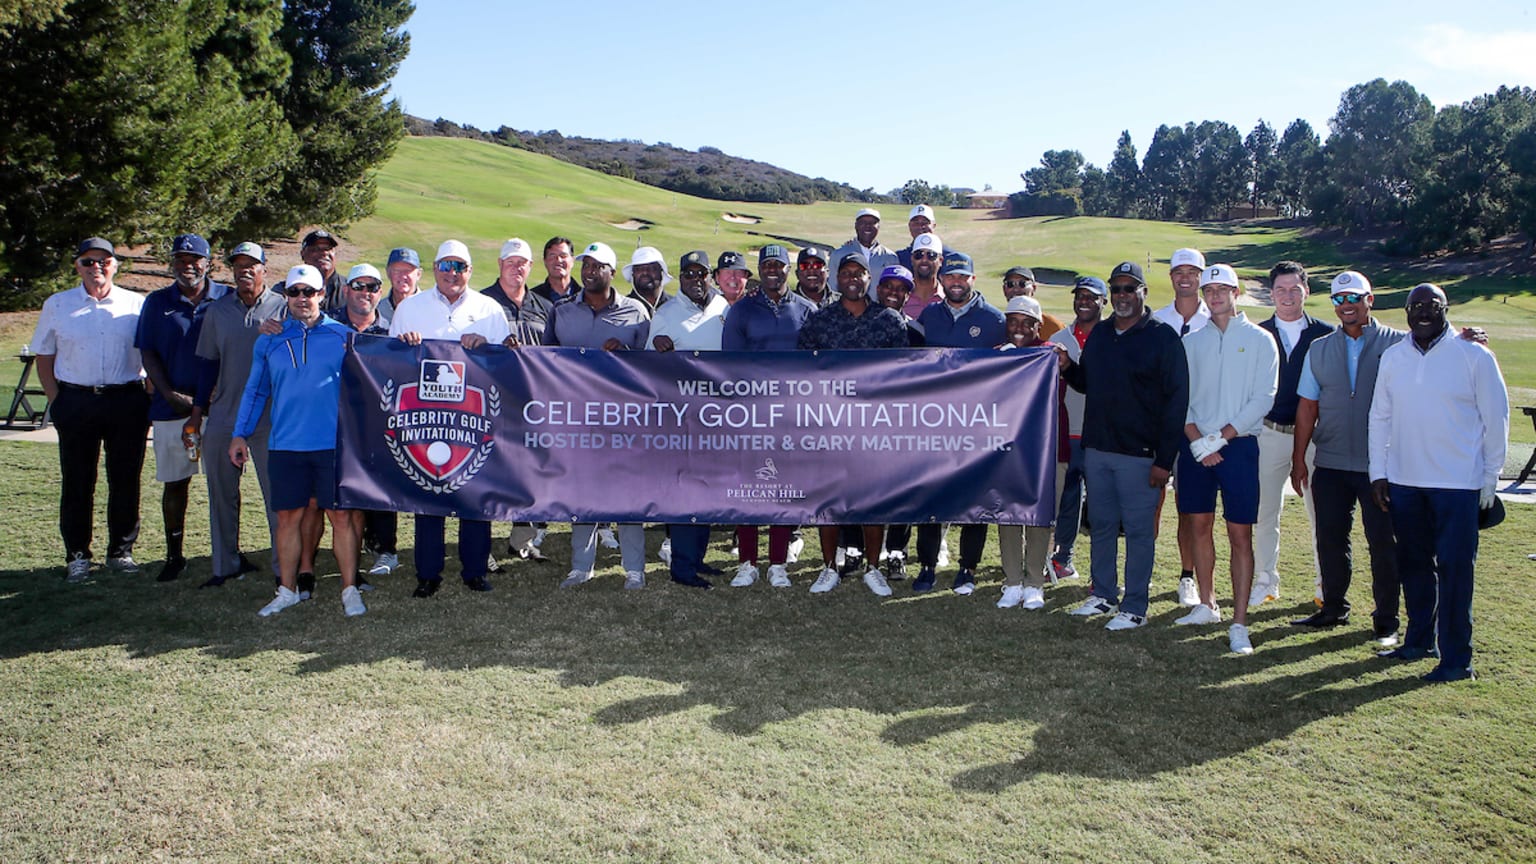 A group of people on a golf course holding a banner